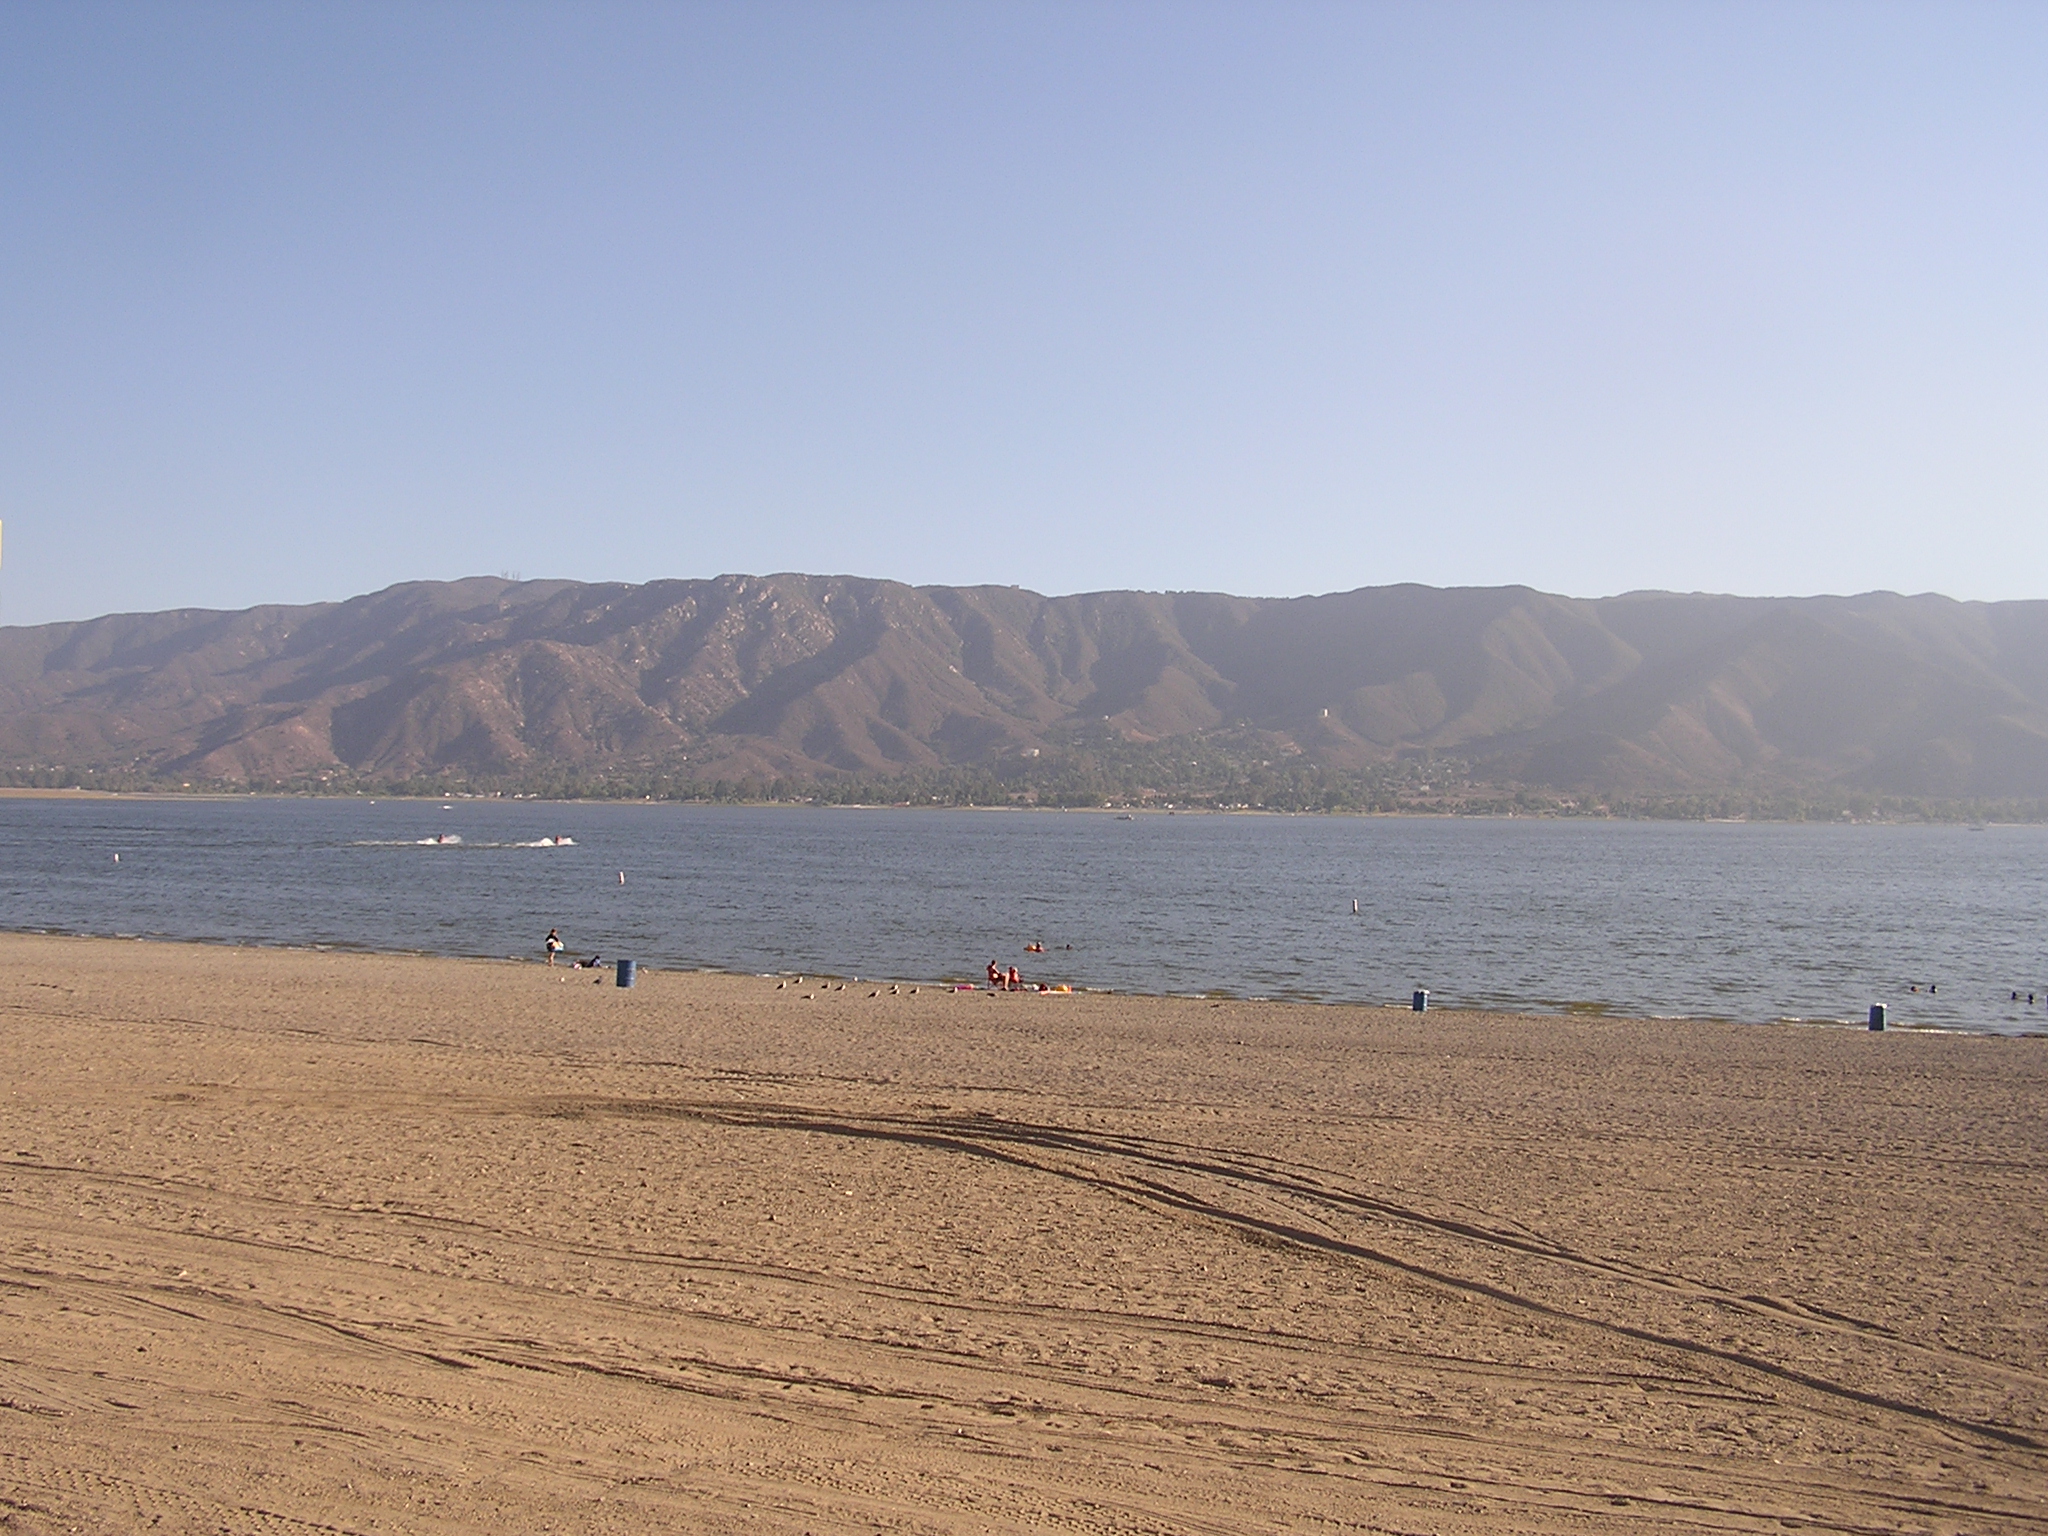 There is a Lake - Lake Elsinore